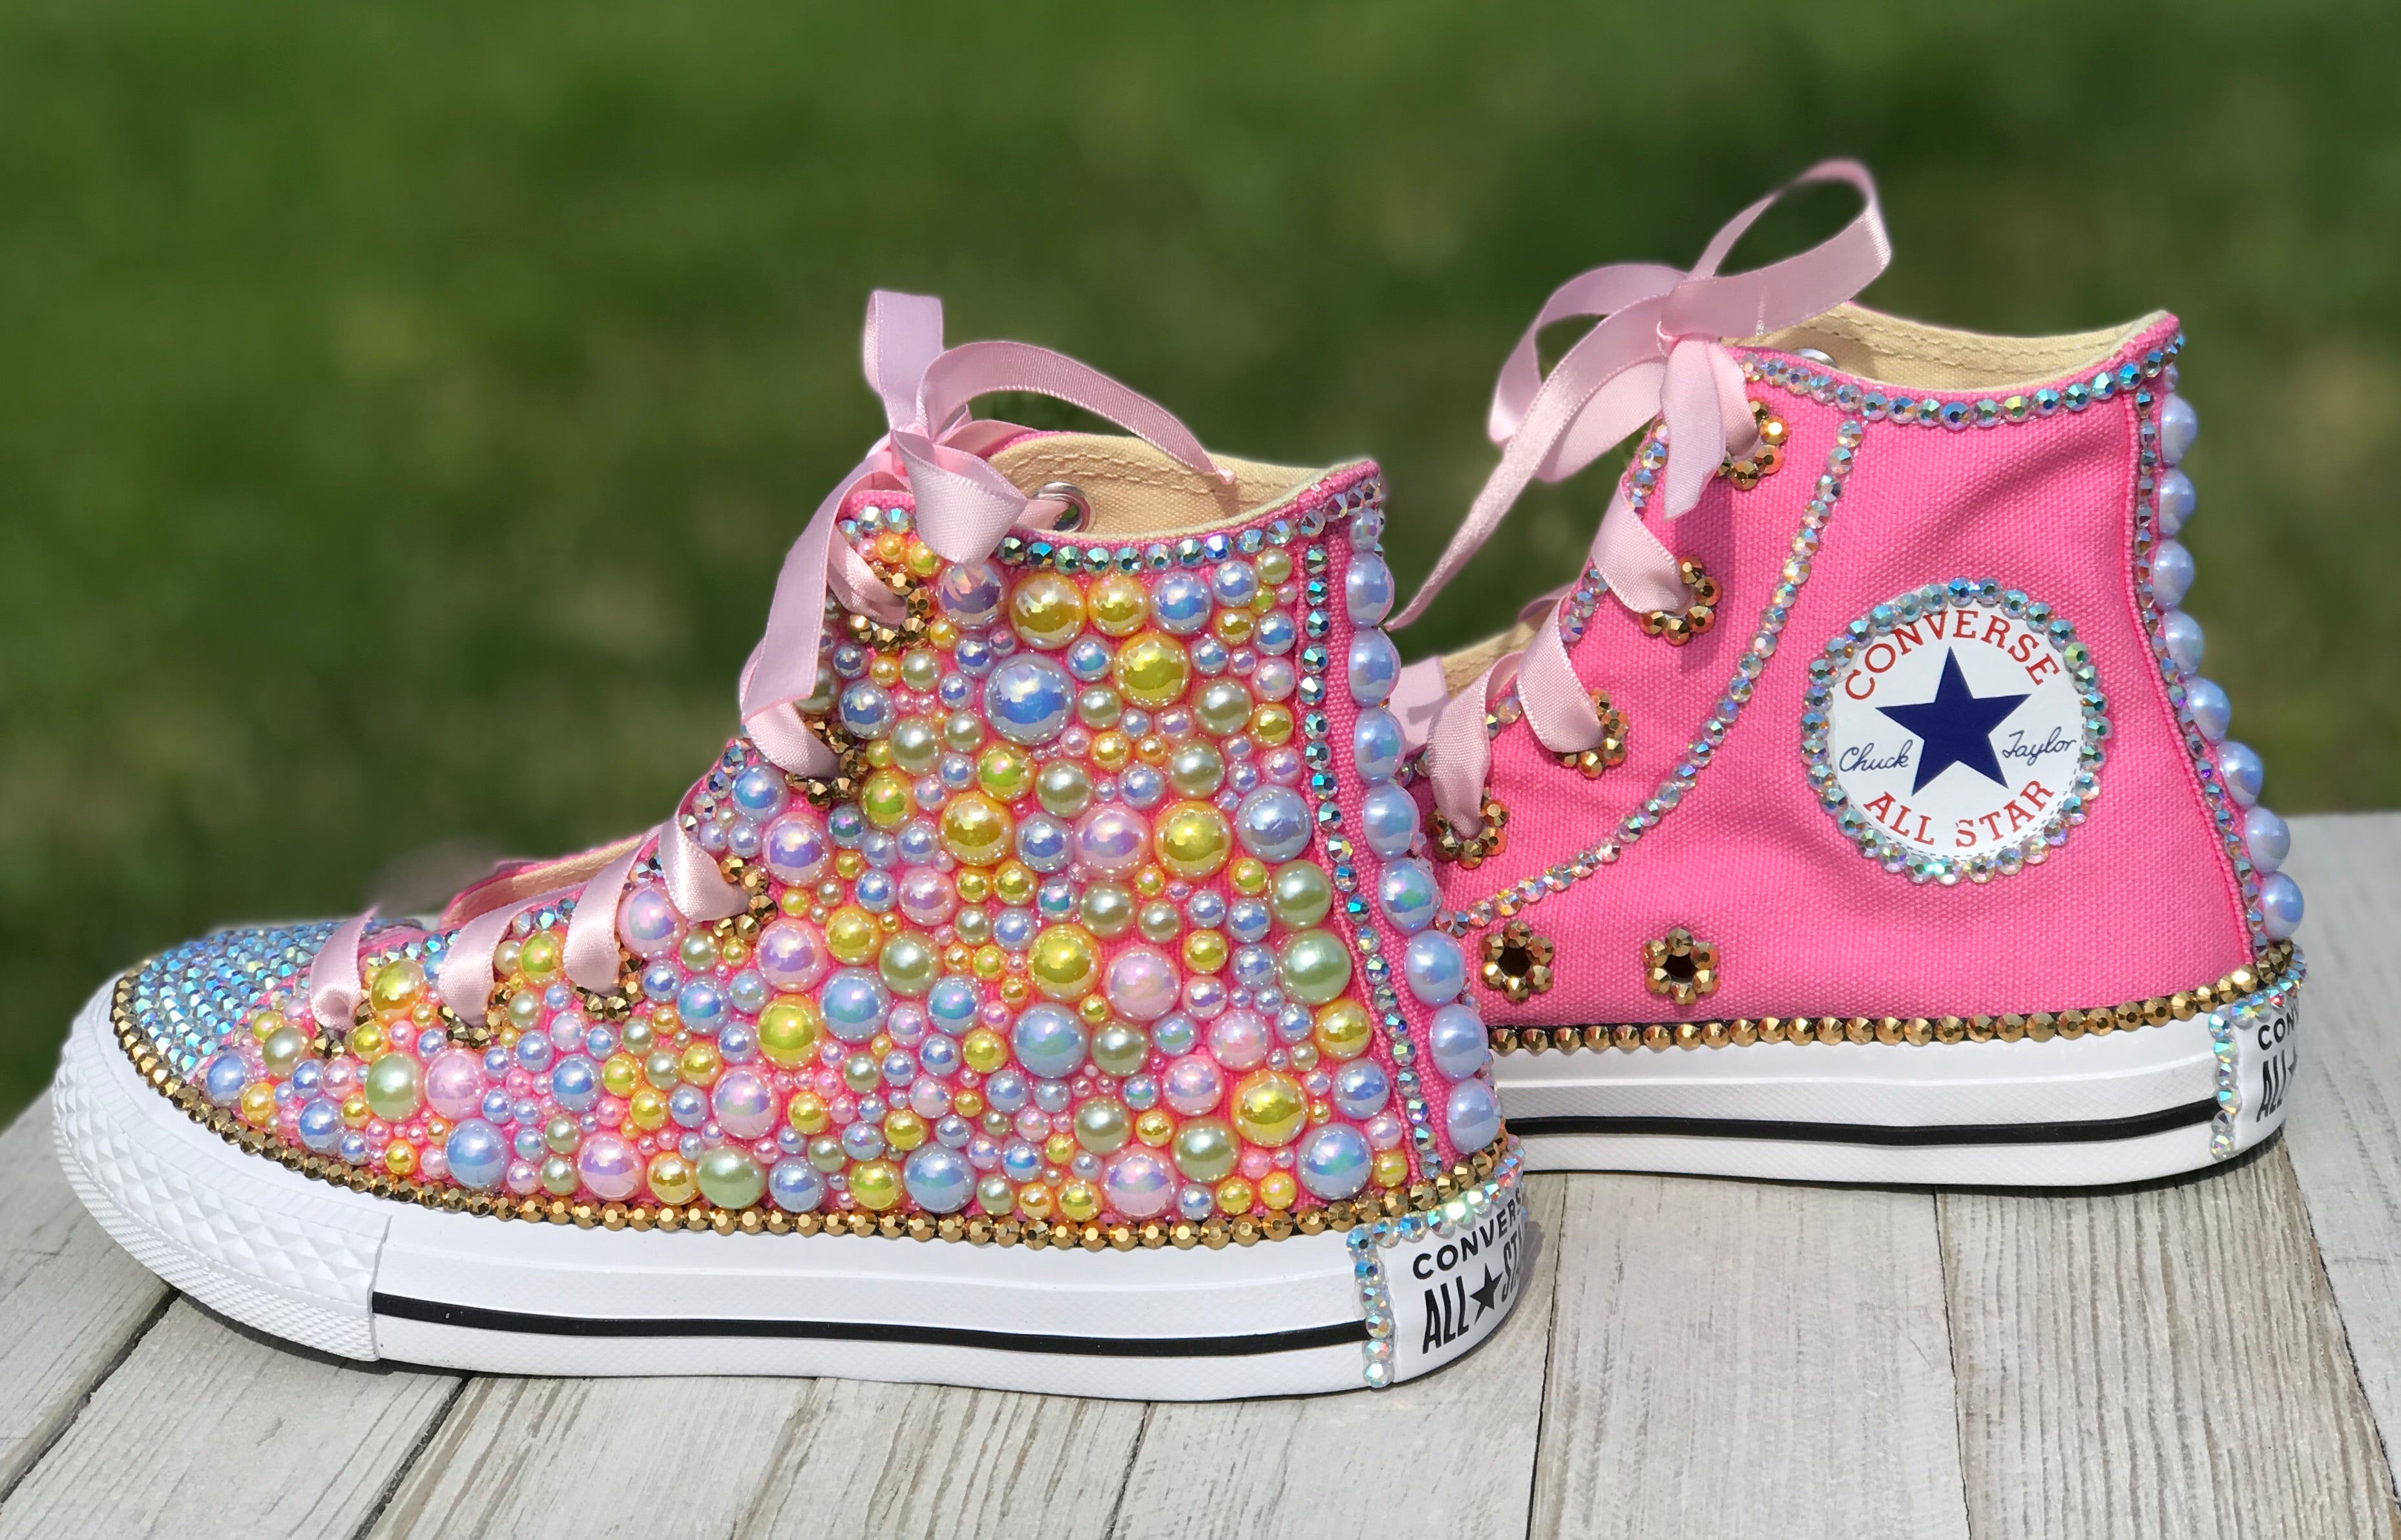 Pink Bedazzled Converse Sneakers | Lille mariehøne Tutus